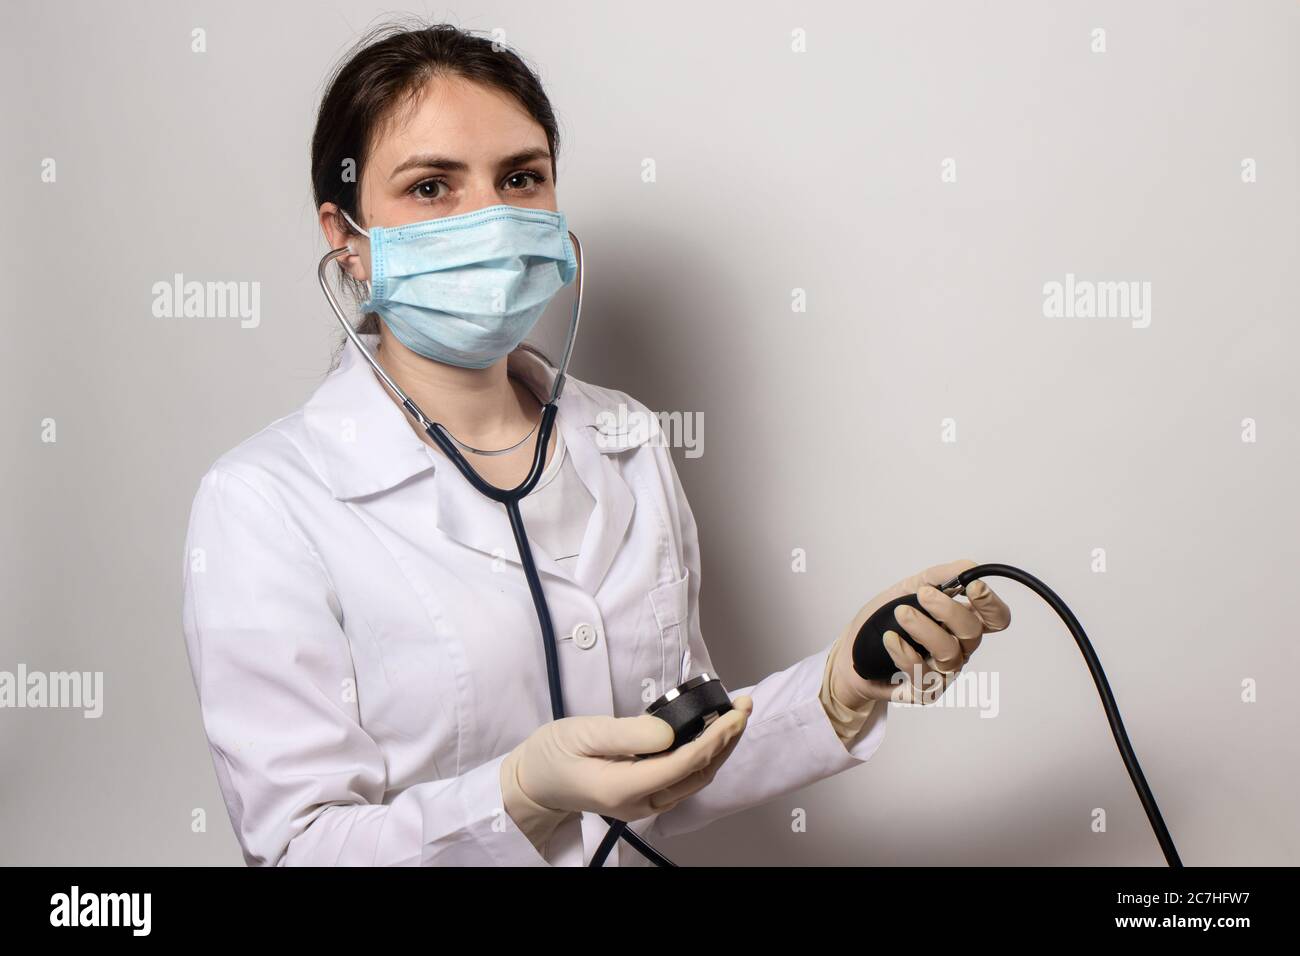 Doctor in a medical mask, cardiologist measures blood pressure with a blood pressure monitor. Stock Photo